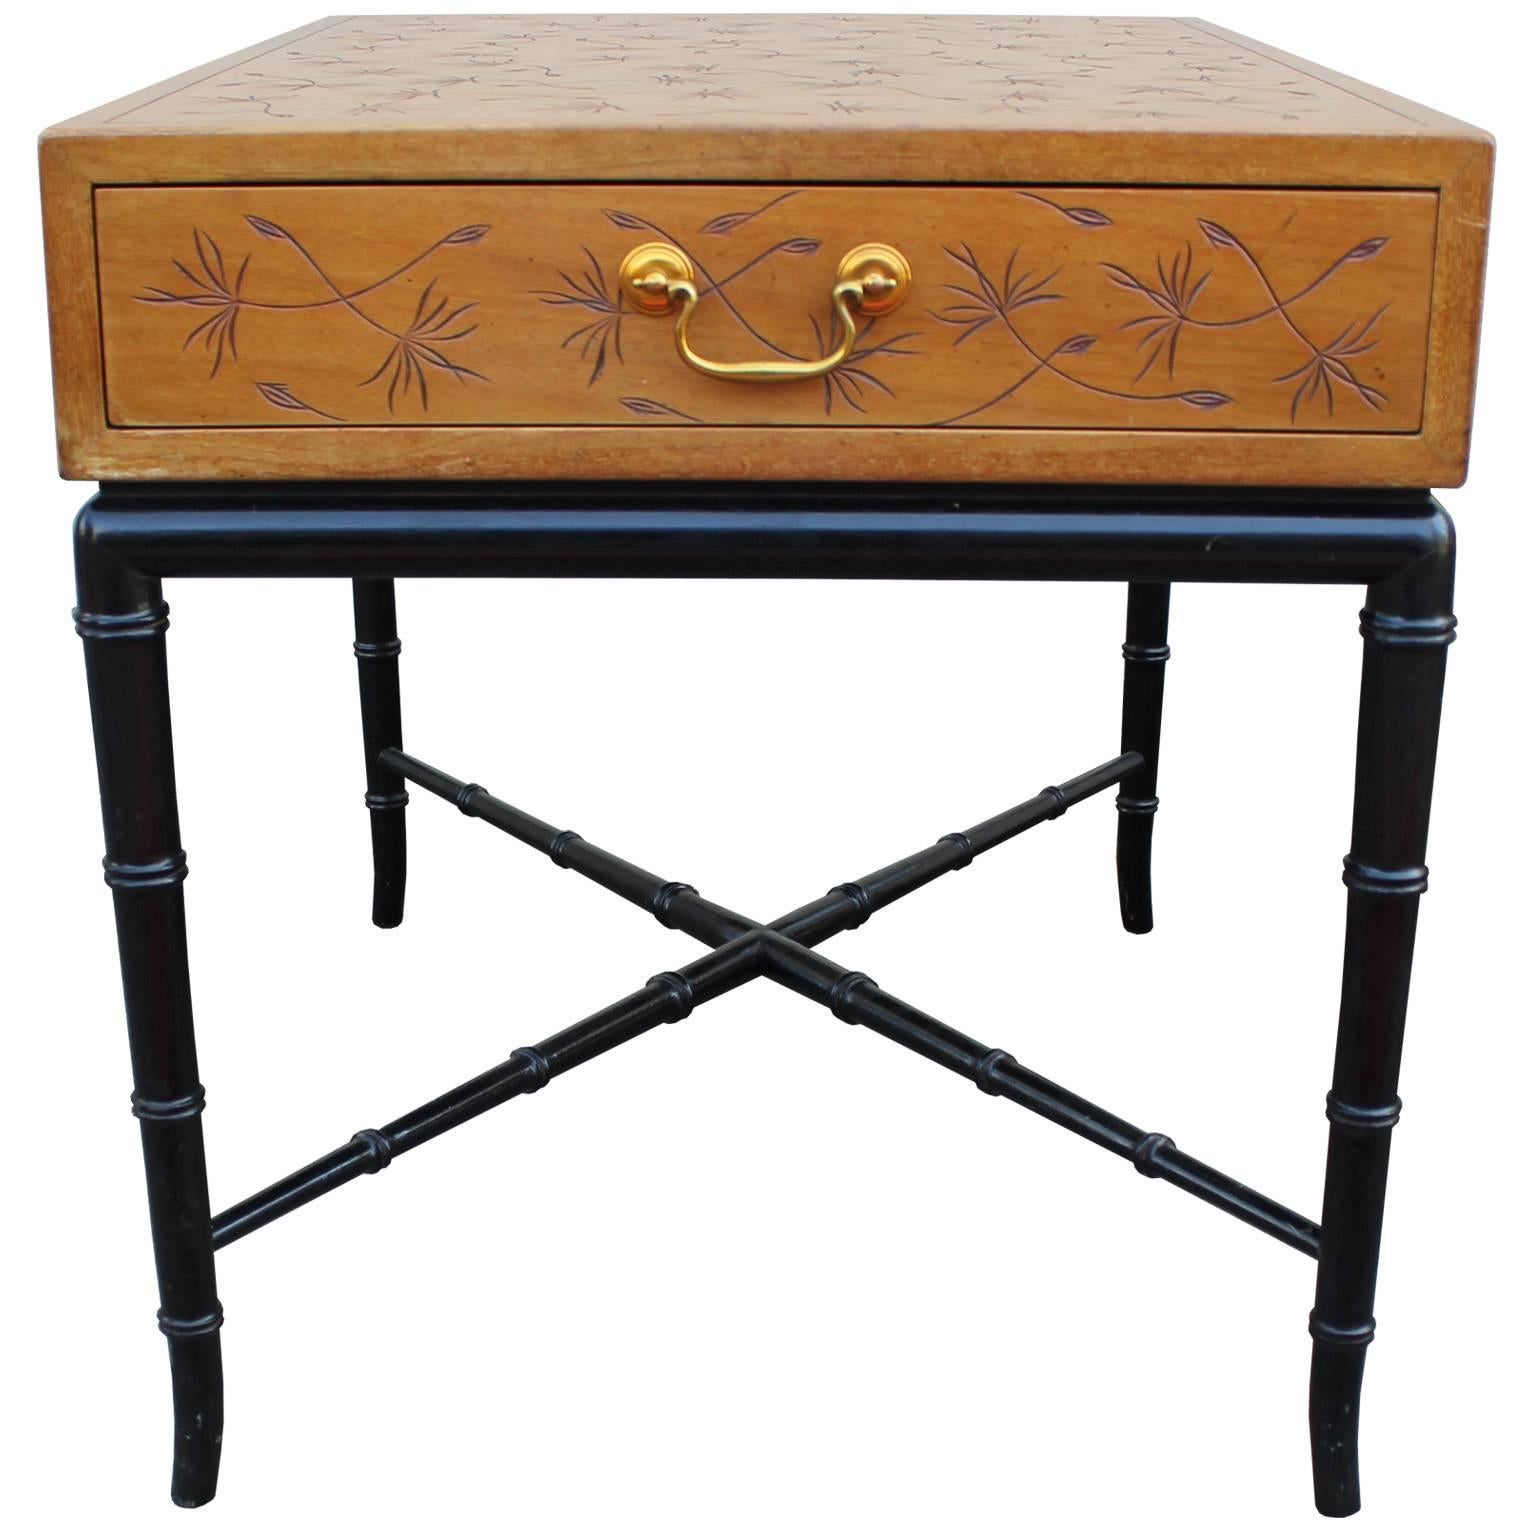 Beautiful pair of side tables or nightstands by Kittinger. Tables are incised with the iconic thistledown motif. Brass hardware accents the single drawer. Black lacquered faux bamboo base with X stretcher complete the table.